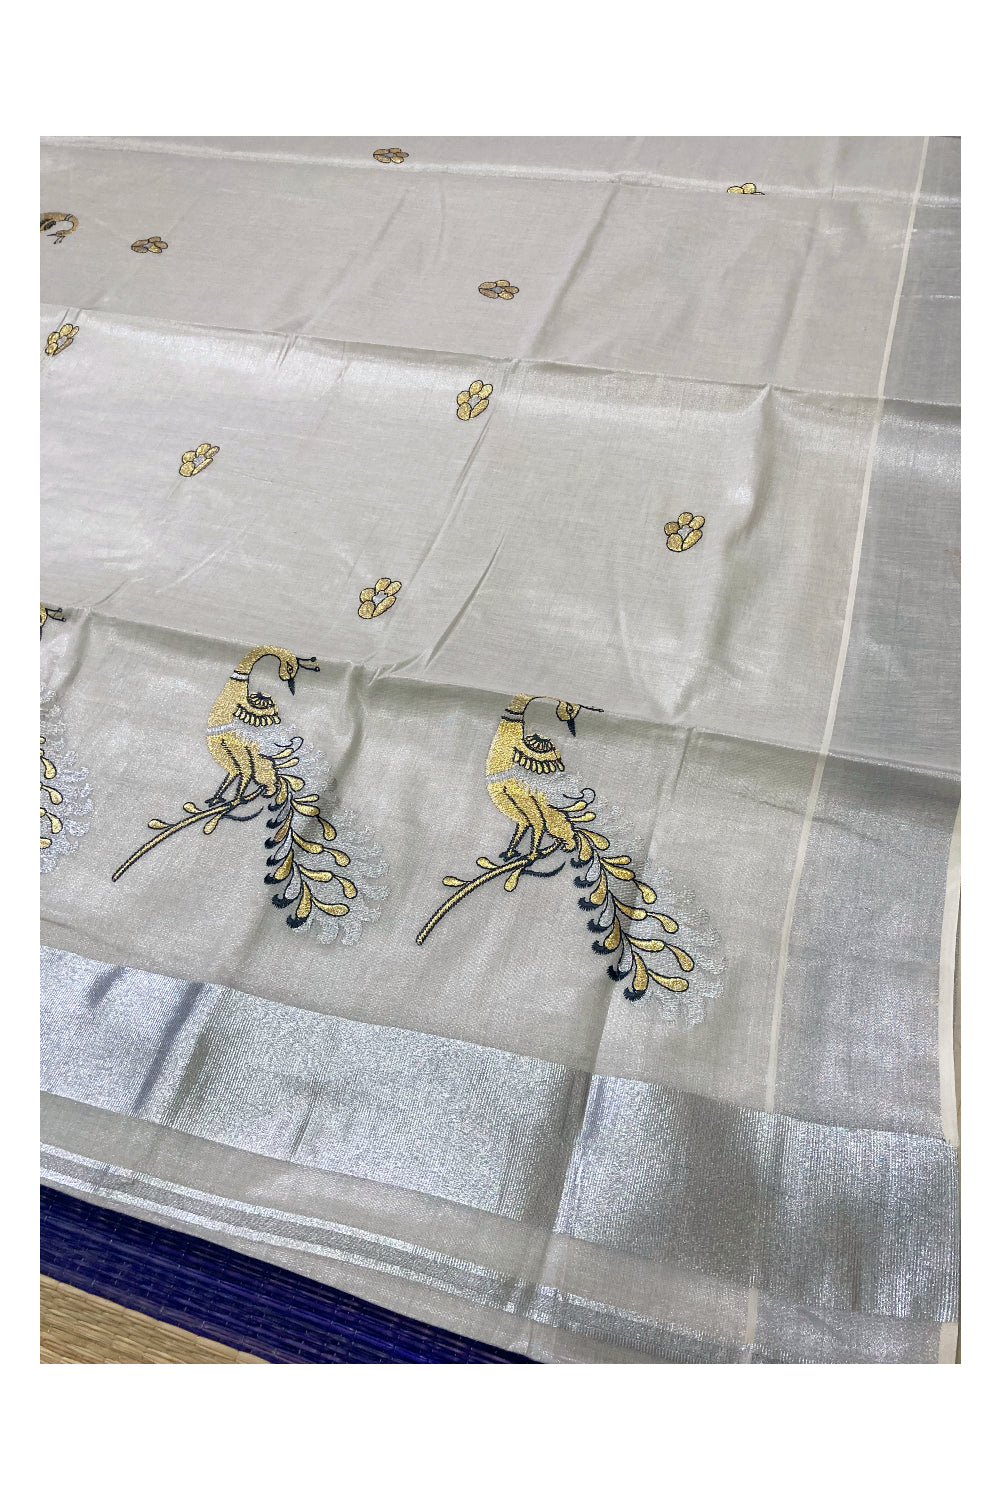 Kerala Silver Tissue Kasavu Saree with Black Golden Peacock Embroidery Works